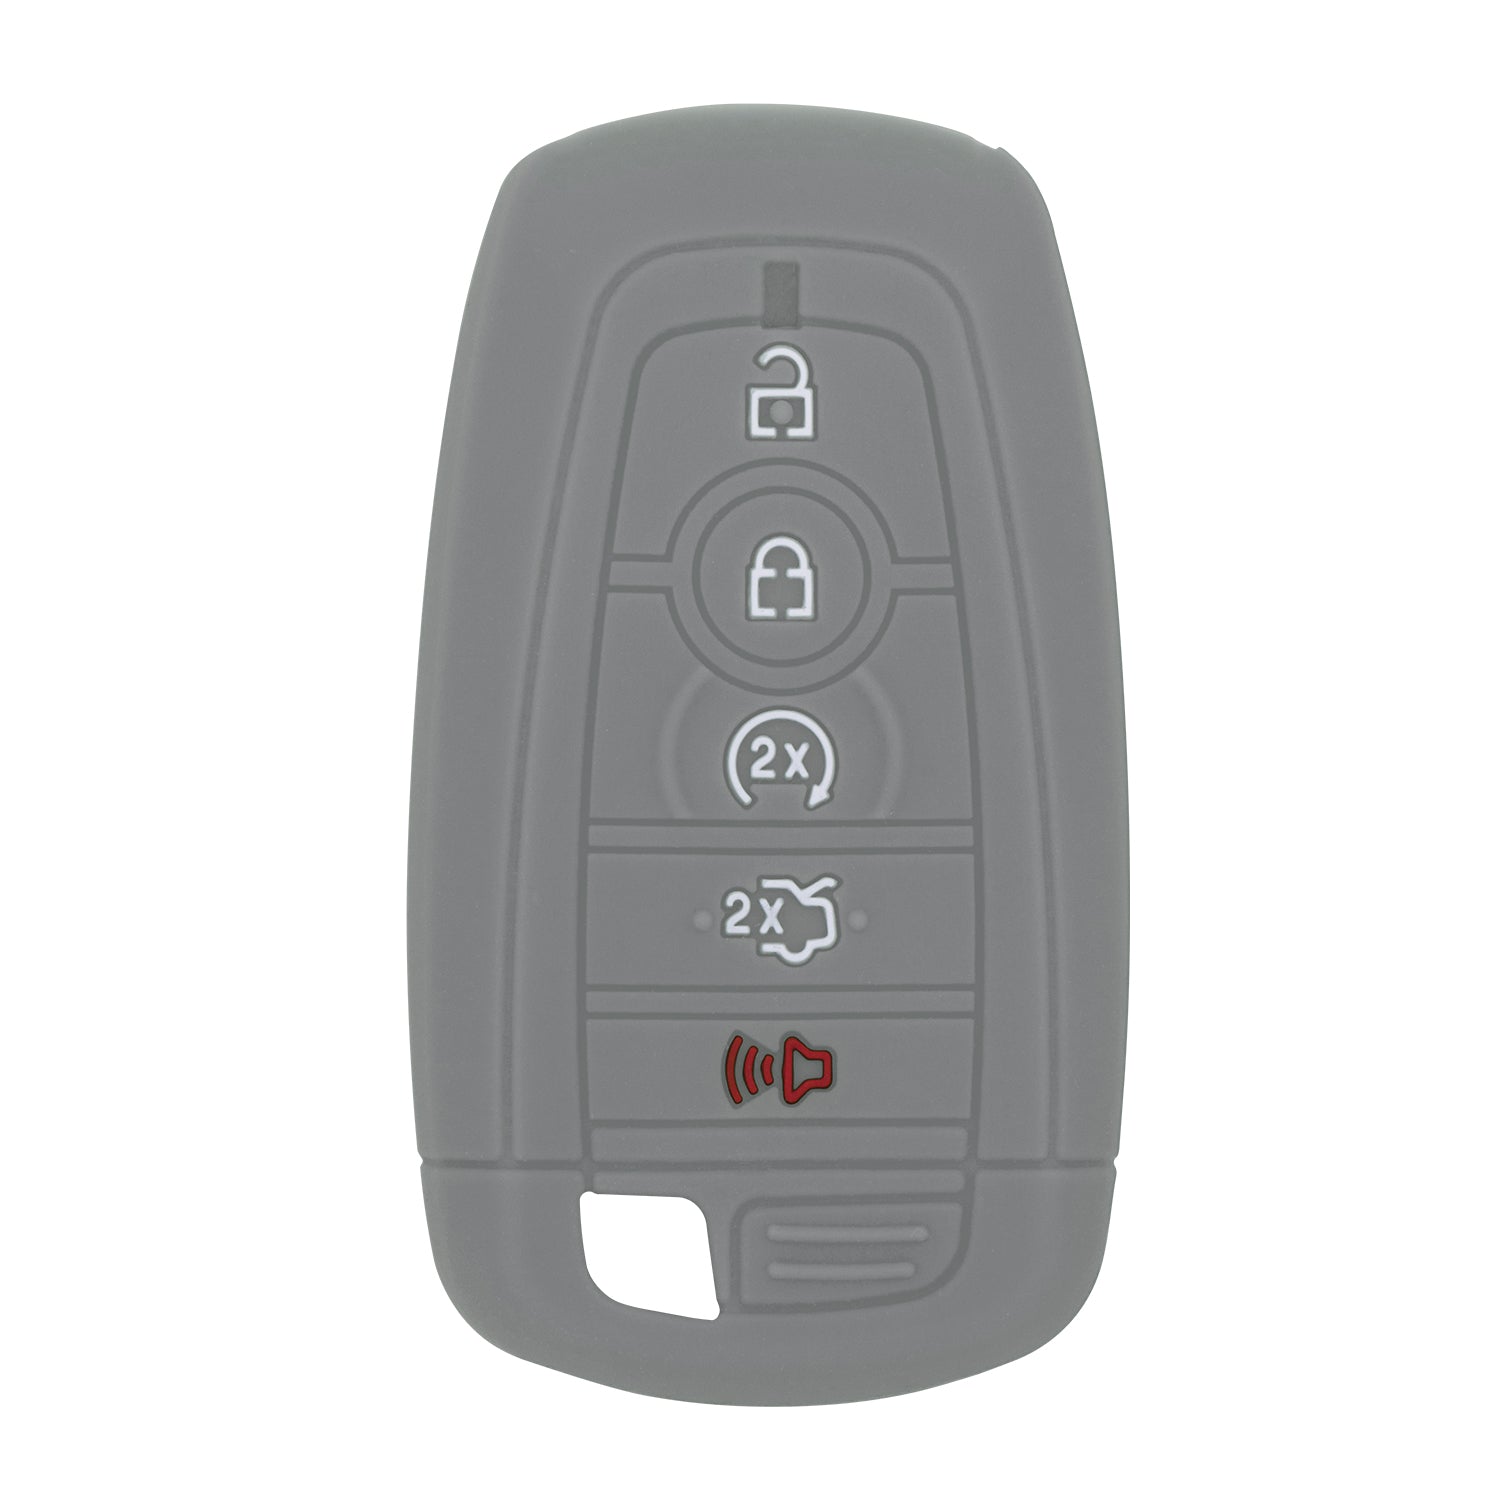 Silicone Case for Smart Key Remote Keyless Entry for Ford Fusion Explorer Edge Mustang Expedition M3N-A2C93142600 164-R8149 164R8149 R8149 (Grey)